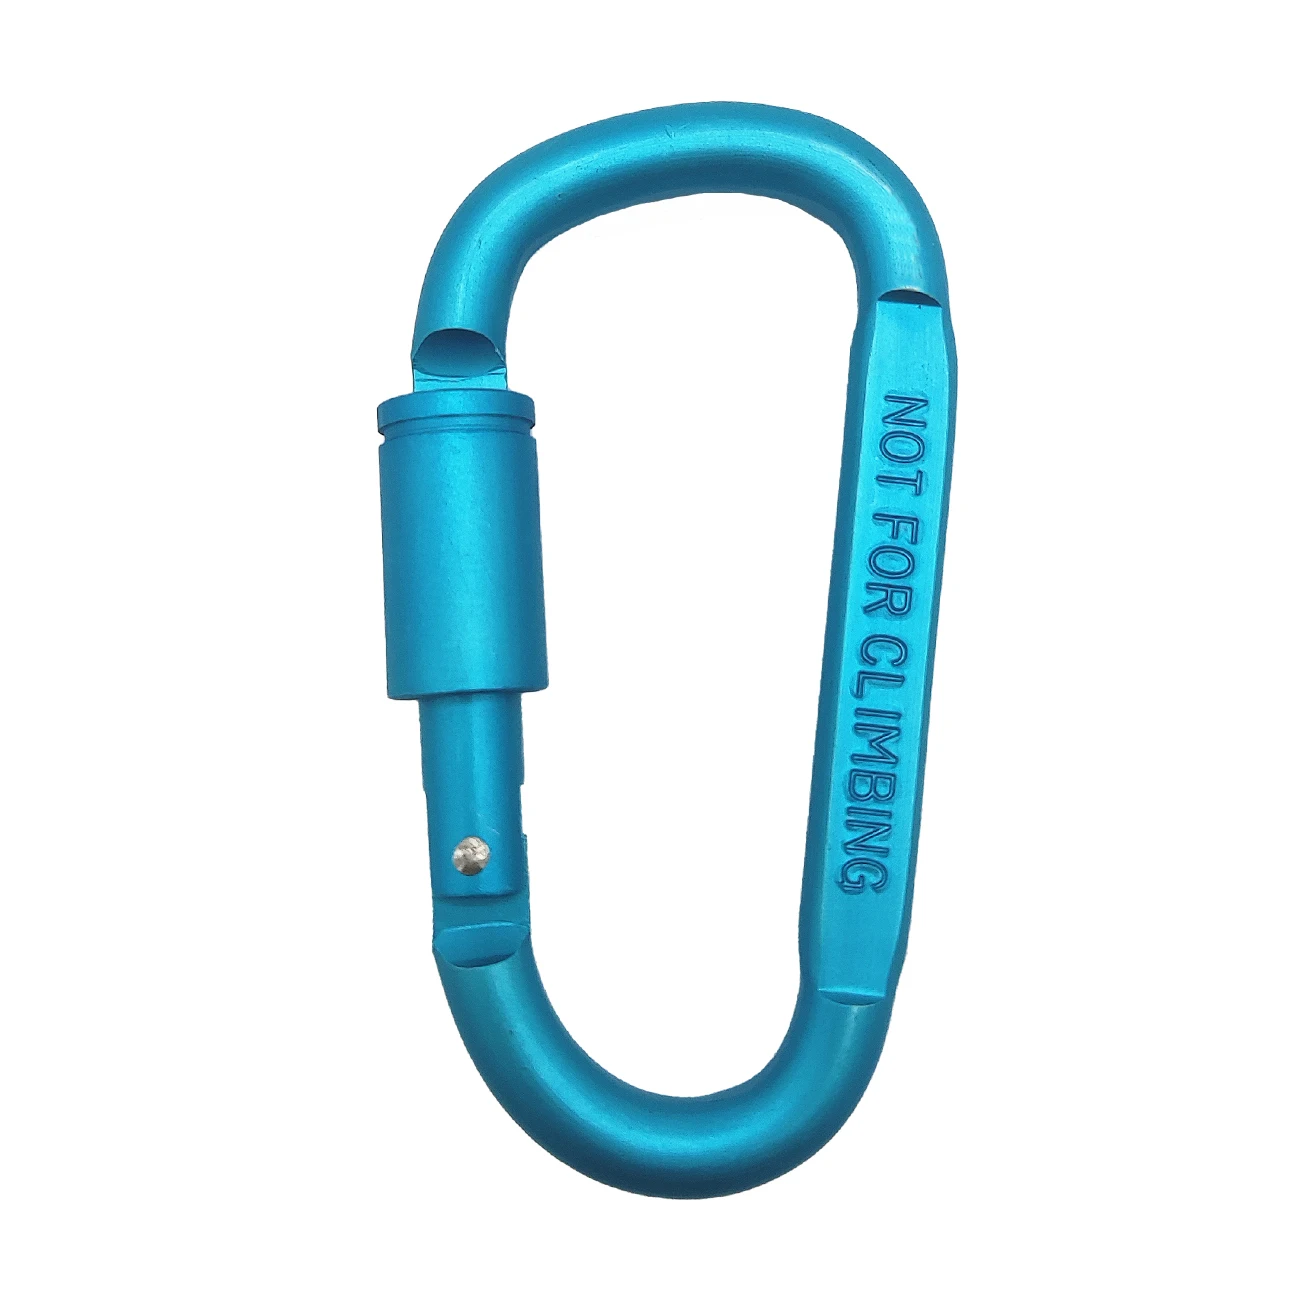 D Type Hook Carabiner Aluminum, Spring Hook with Nut ,Backpack Key Hook , Hiking Camp Outdoor Climbing Equipment,Carabiners